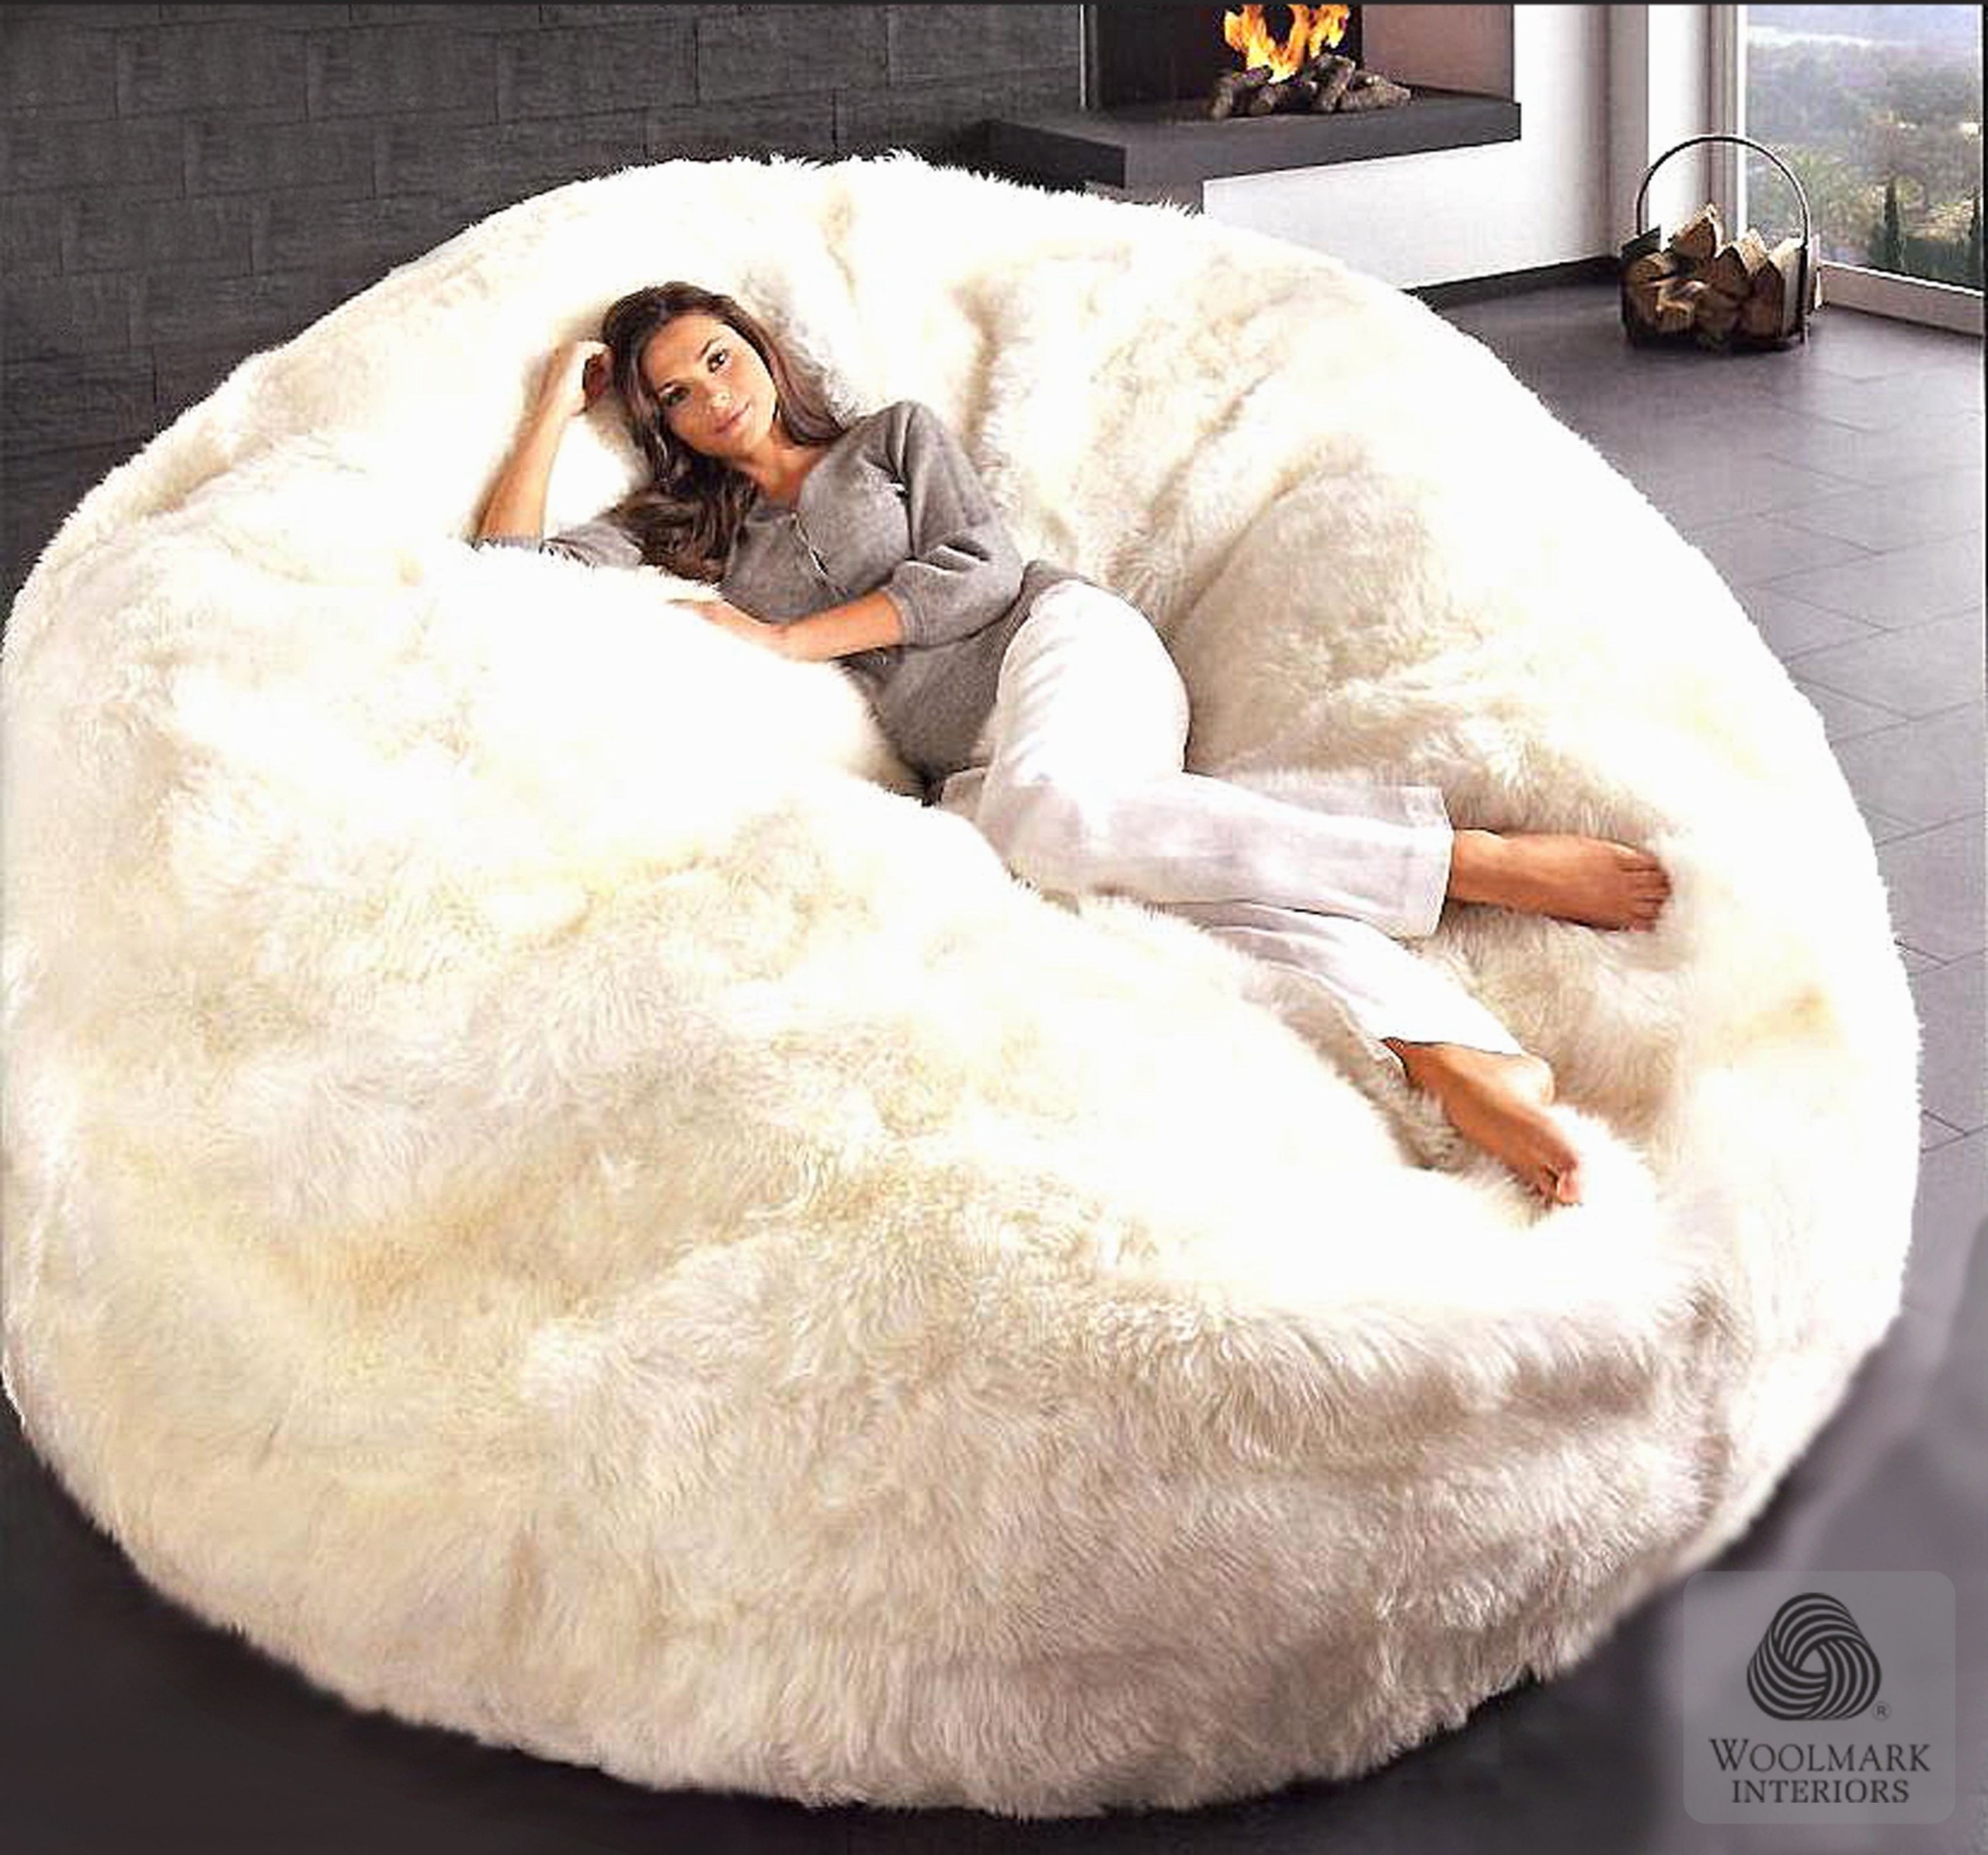 Luxury Bean Bag Chairs: All You Need to Know About Them – Wilson & Dorset